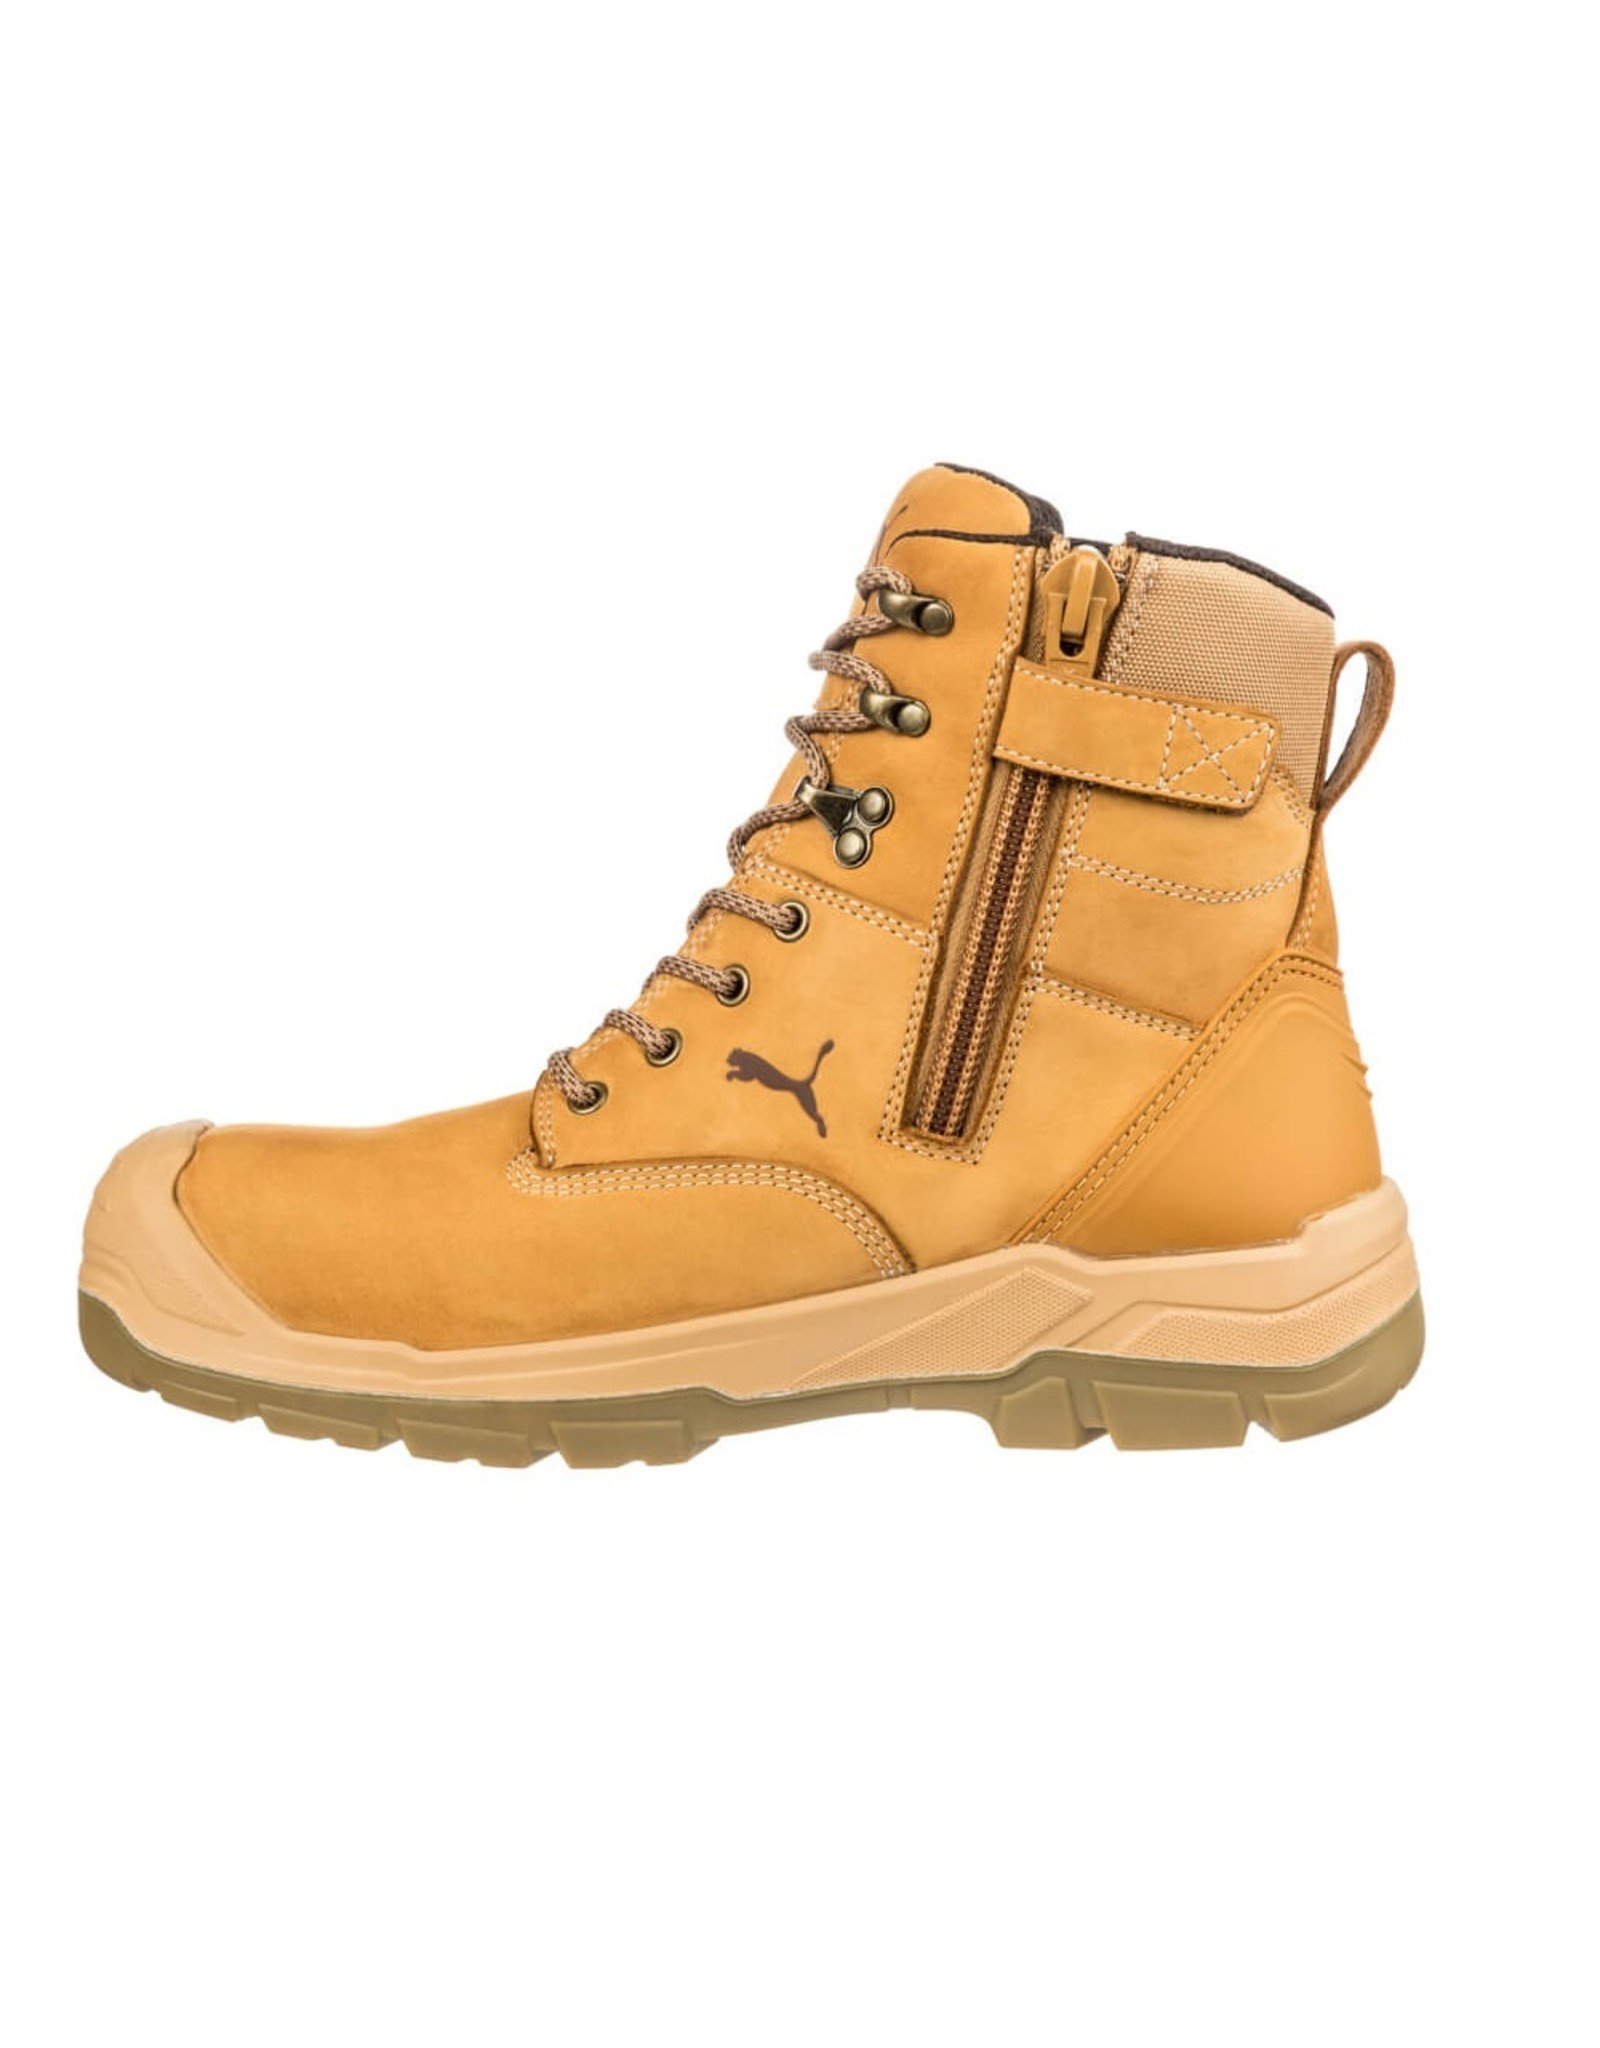 Puma Safety Puma Safety Conquest Wheat Waterproof Boot